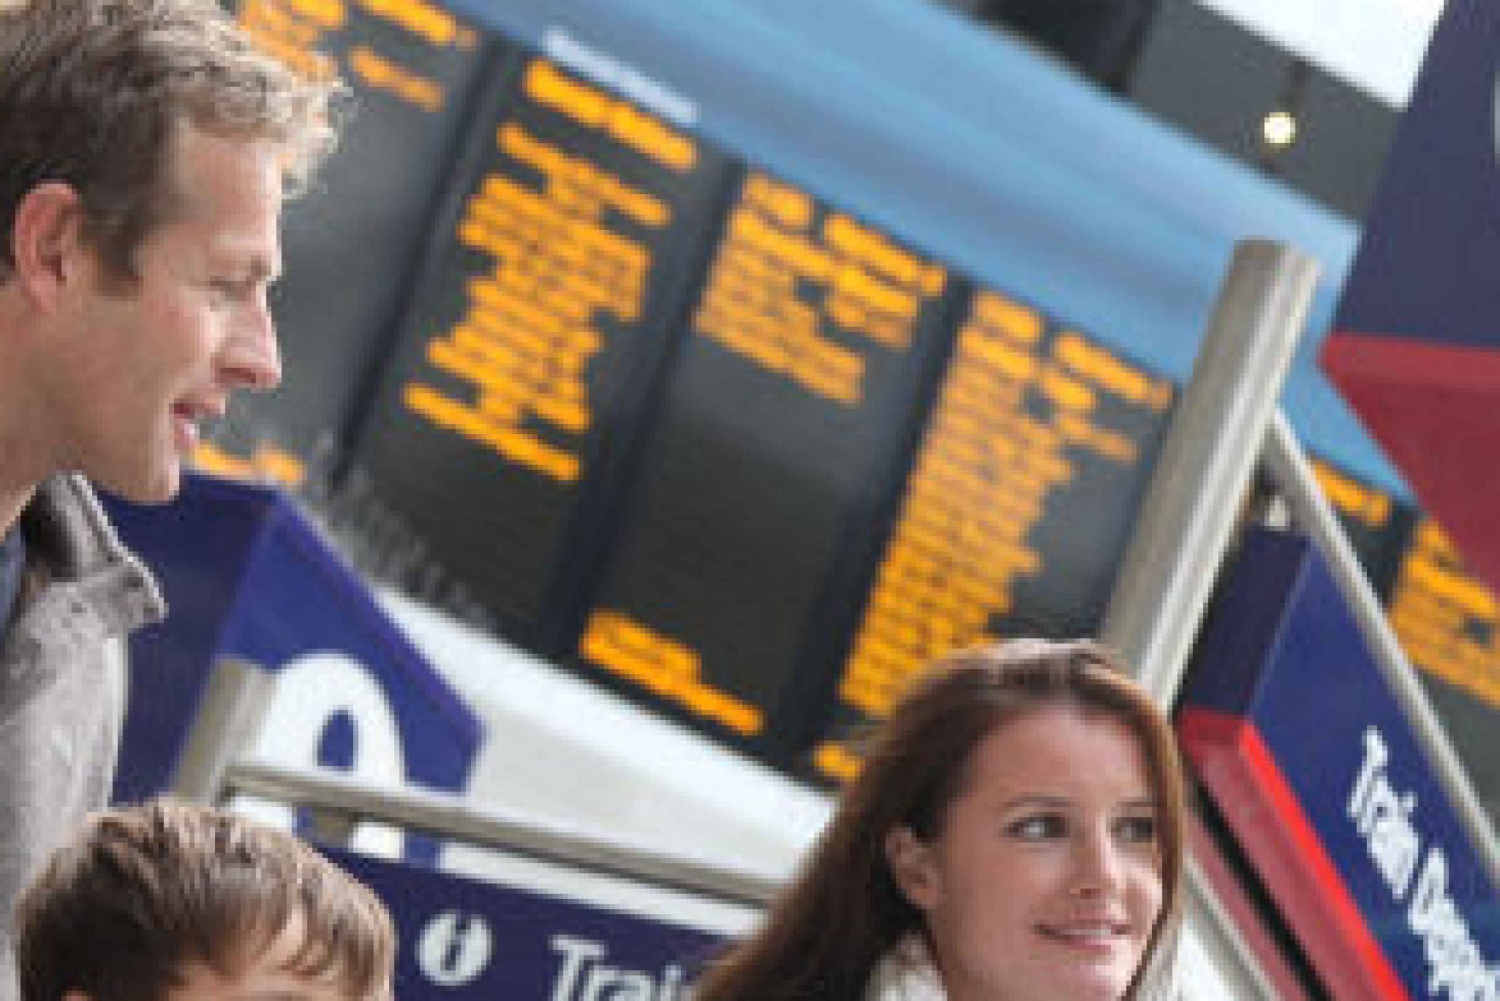 Stansted Express: 1-Way or Return London Train Ticket